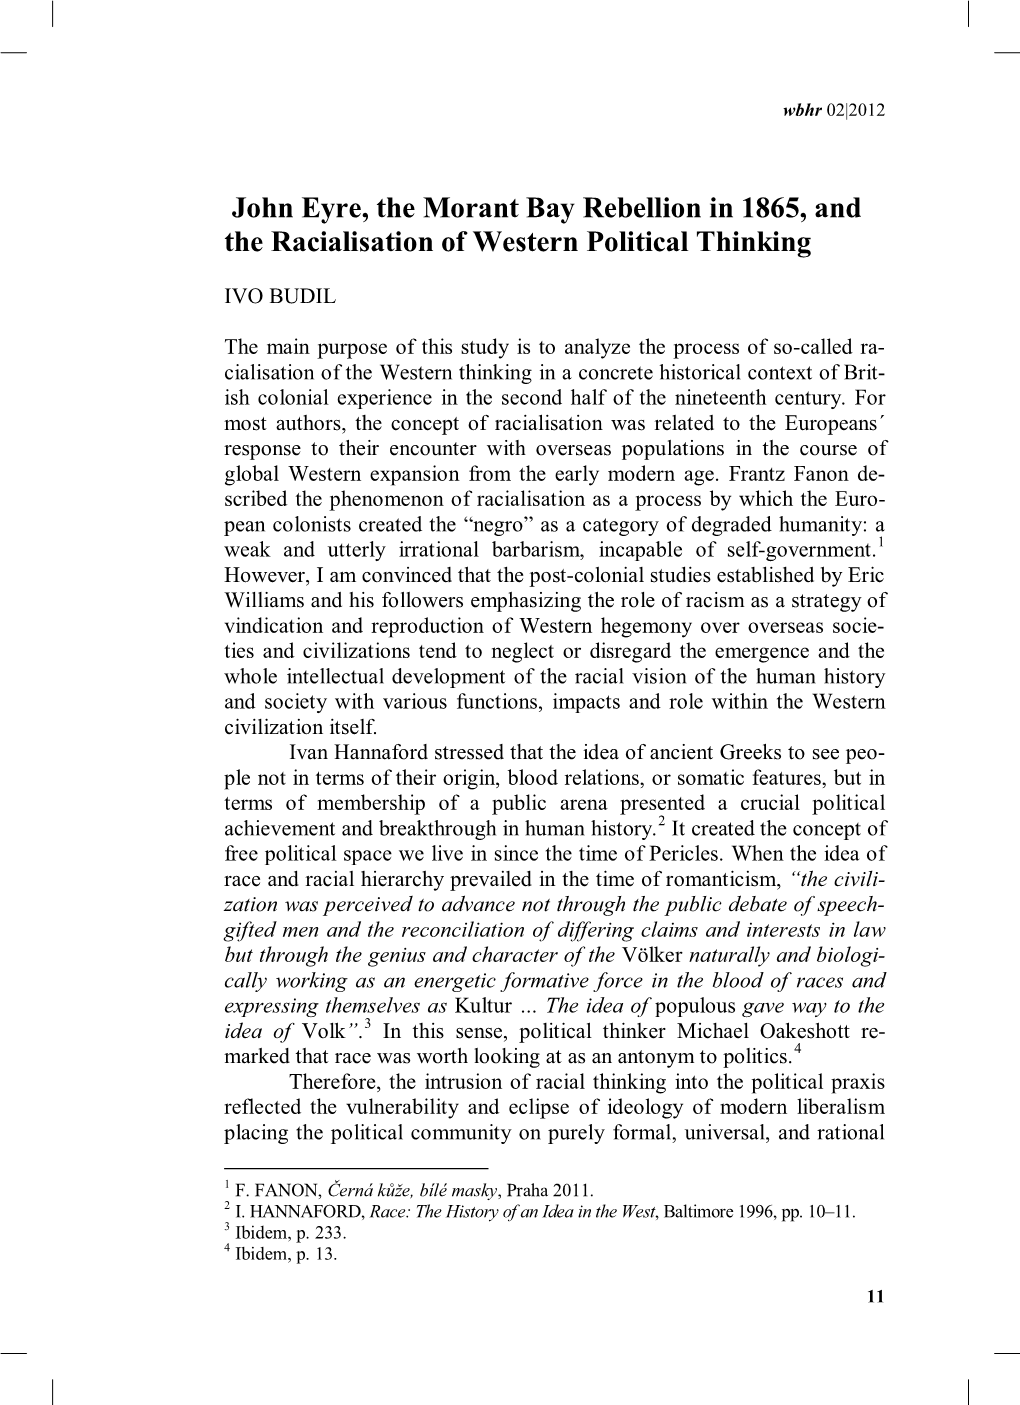 John Eyre, the Morant Bay Rebellion in 1865, and the Racialisation of Western Political Thinking